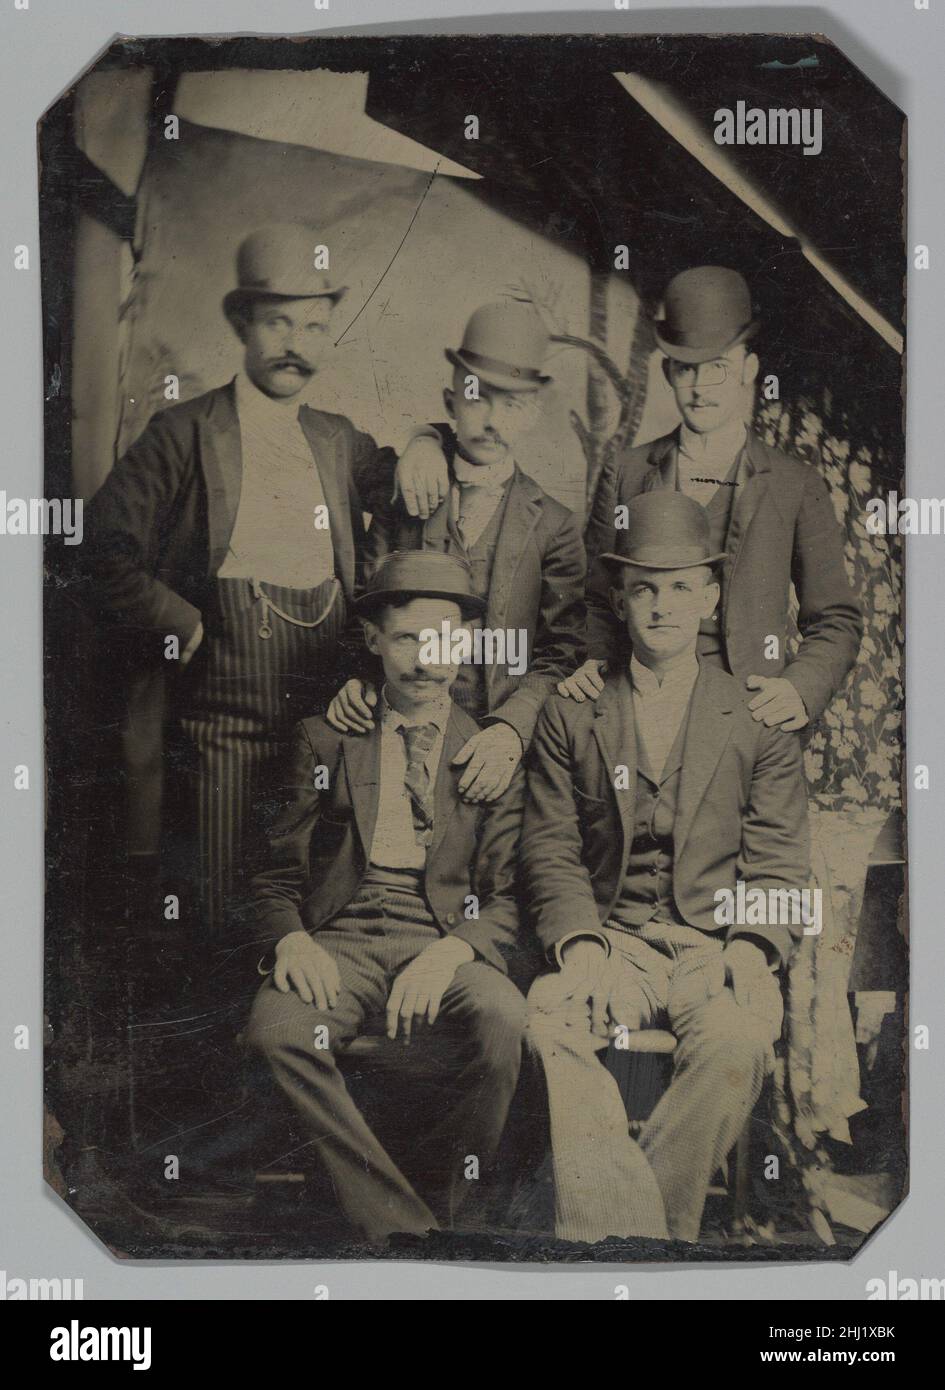 [Five Members of the Wild Bunch?] ca. 1892 Unknown The Wild Bunch was the largest and most notorious band of outlaws in the American West. Led by two gunmen better known by their aliases, Butch Cassidy (Robert LeRoy Parker) and Kid Curry (Harvey Logan), the Wild Bunch was an informal trust of thieves and rustlers that preyed upon stagecoaches, small banks, and especially railroads from the late 1880s to the first decade of the twentieth century. This crudely constructed tintype portrait of five members of the gang dressed in bowler hats and city clothes shows, clockwise, from the top left, Kid Stock Photo